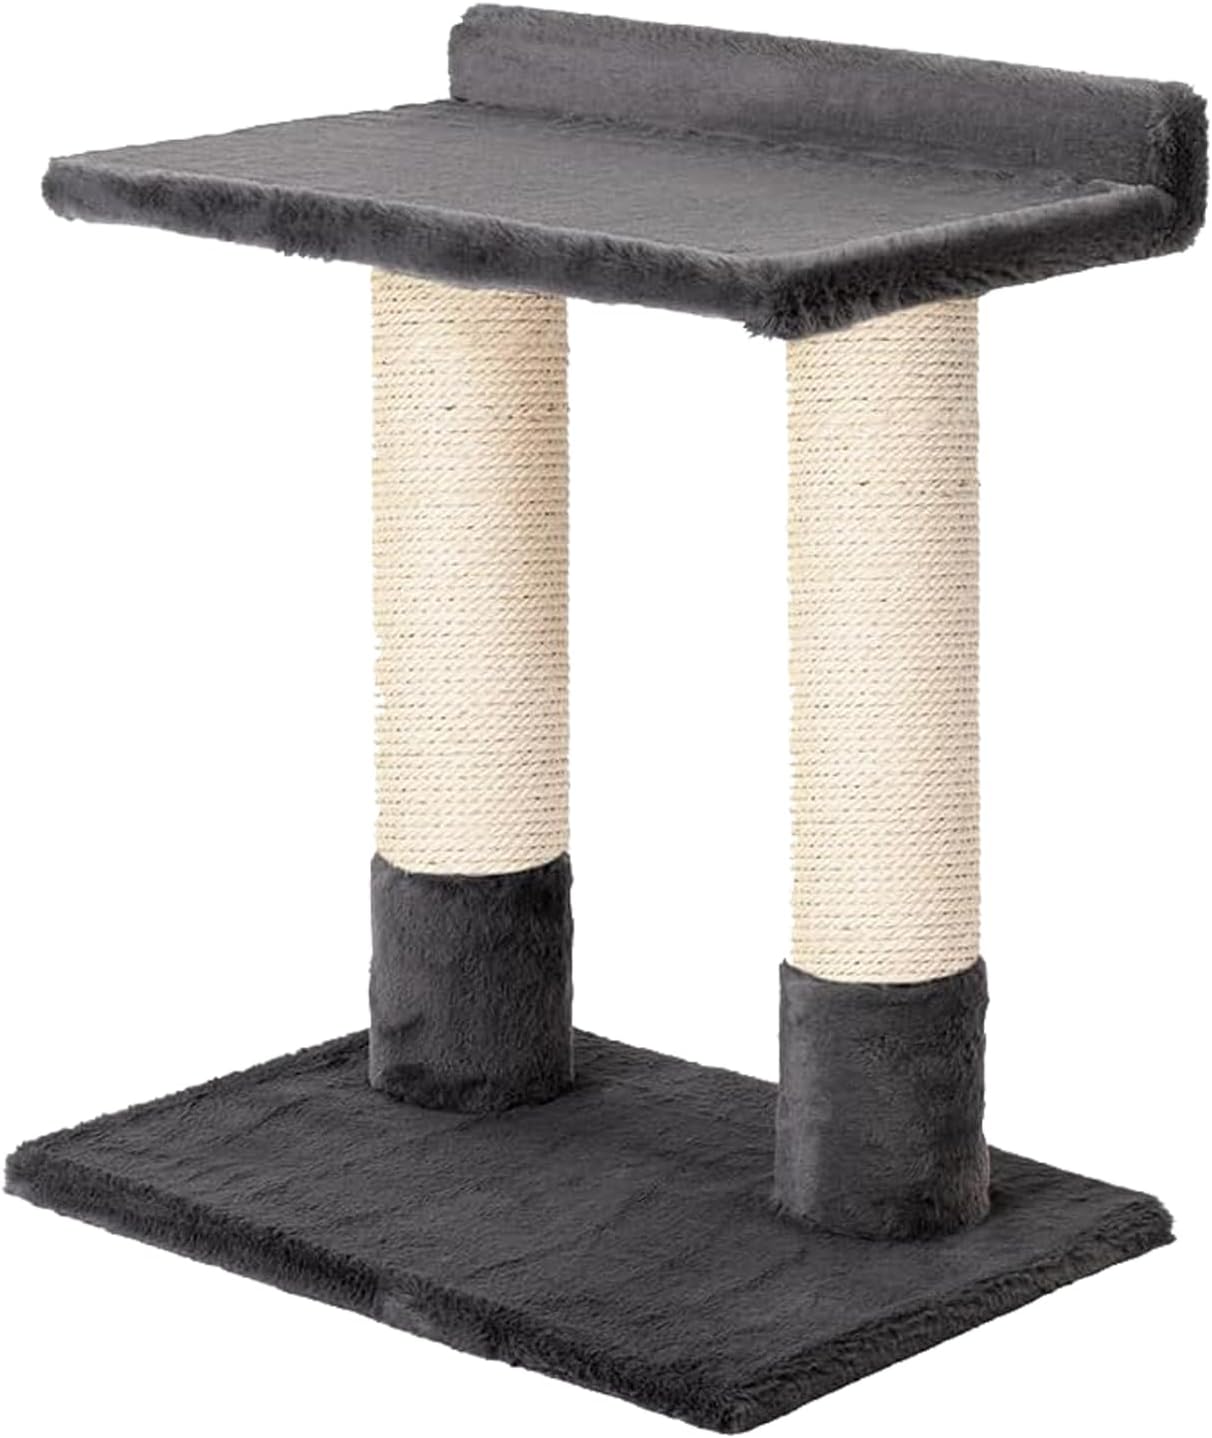 24 Inch Classic Comfort for Indoor Modern Premium Cats and Kittens Scratcher Larger Base for Better Stability, (Grey, Nat